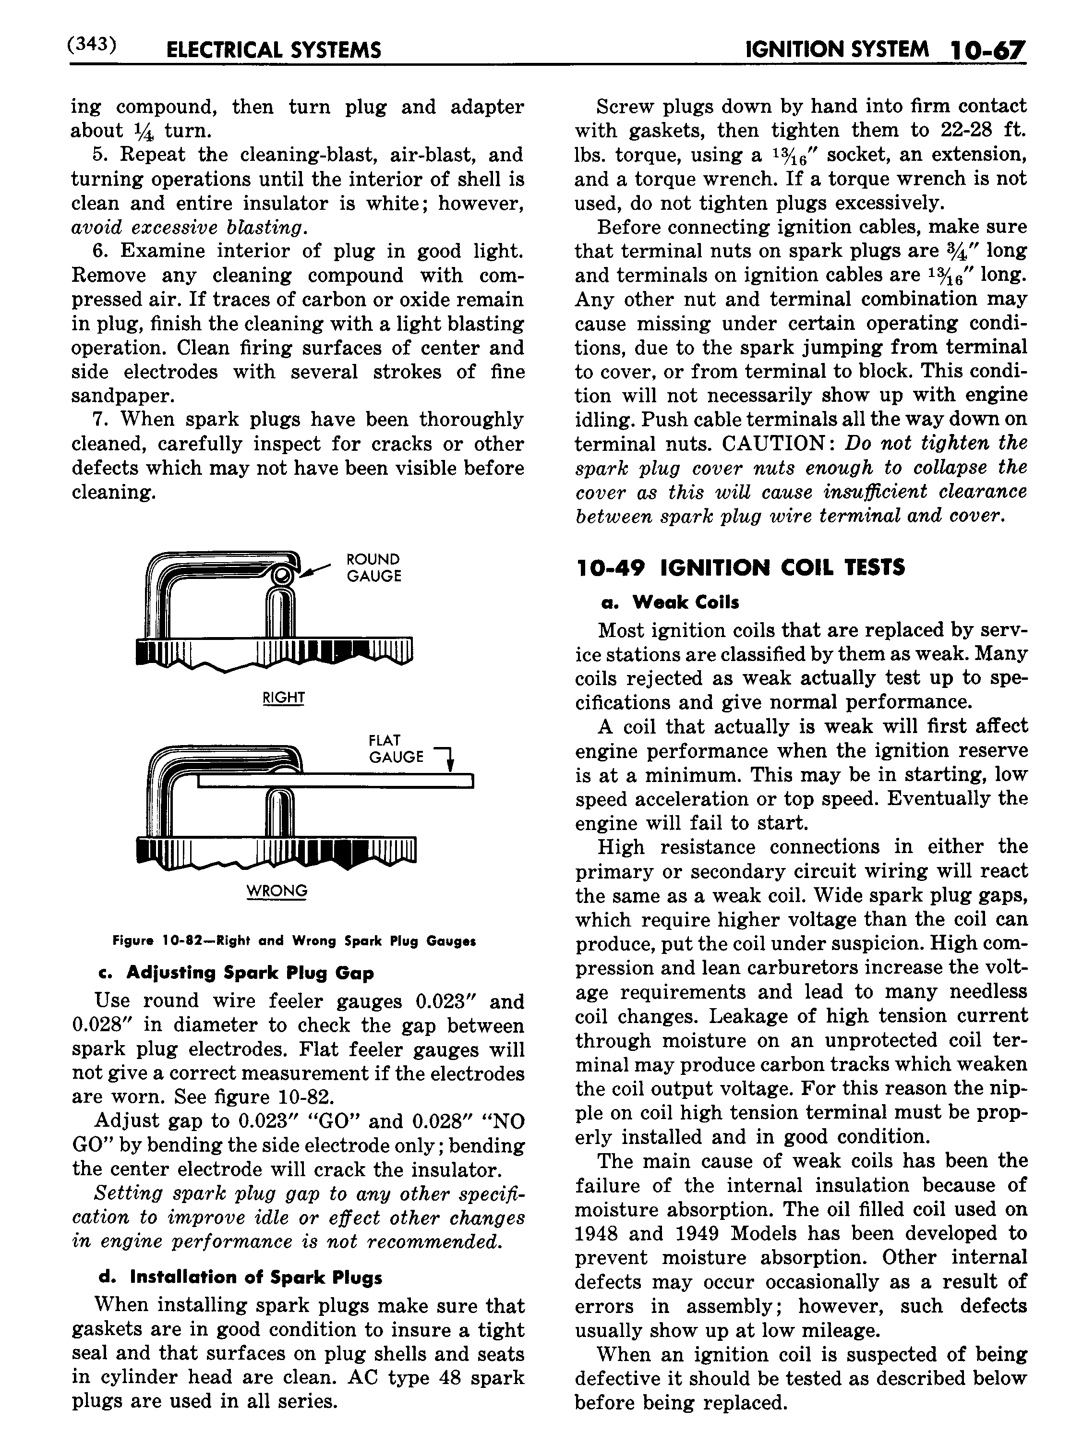 n_11 1948 Buick Shop Manual - Electrical Systems-067-067.jpg